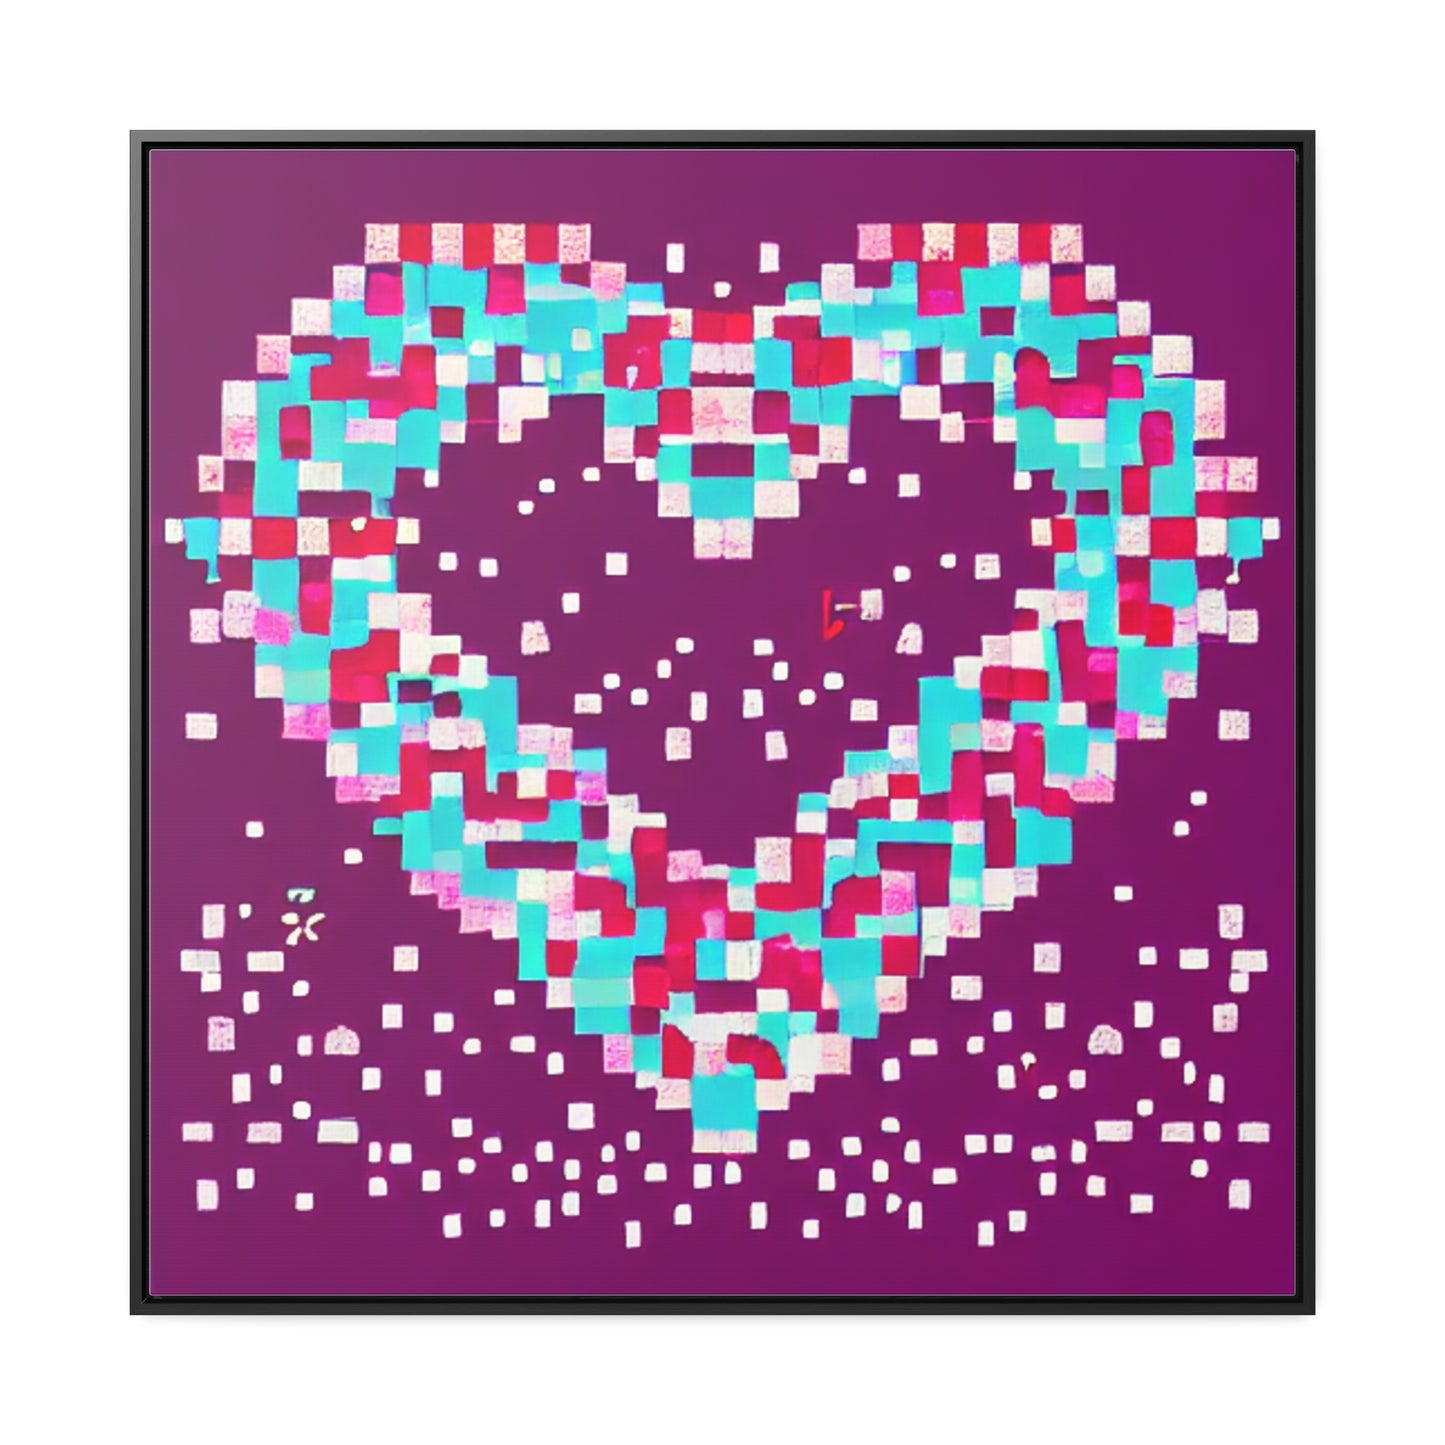 A Colorful Heart on Gallery Canvas Wraps, Square Frame